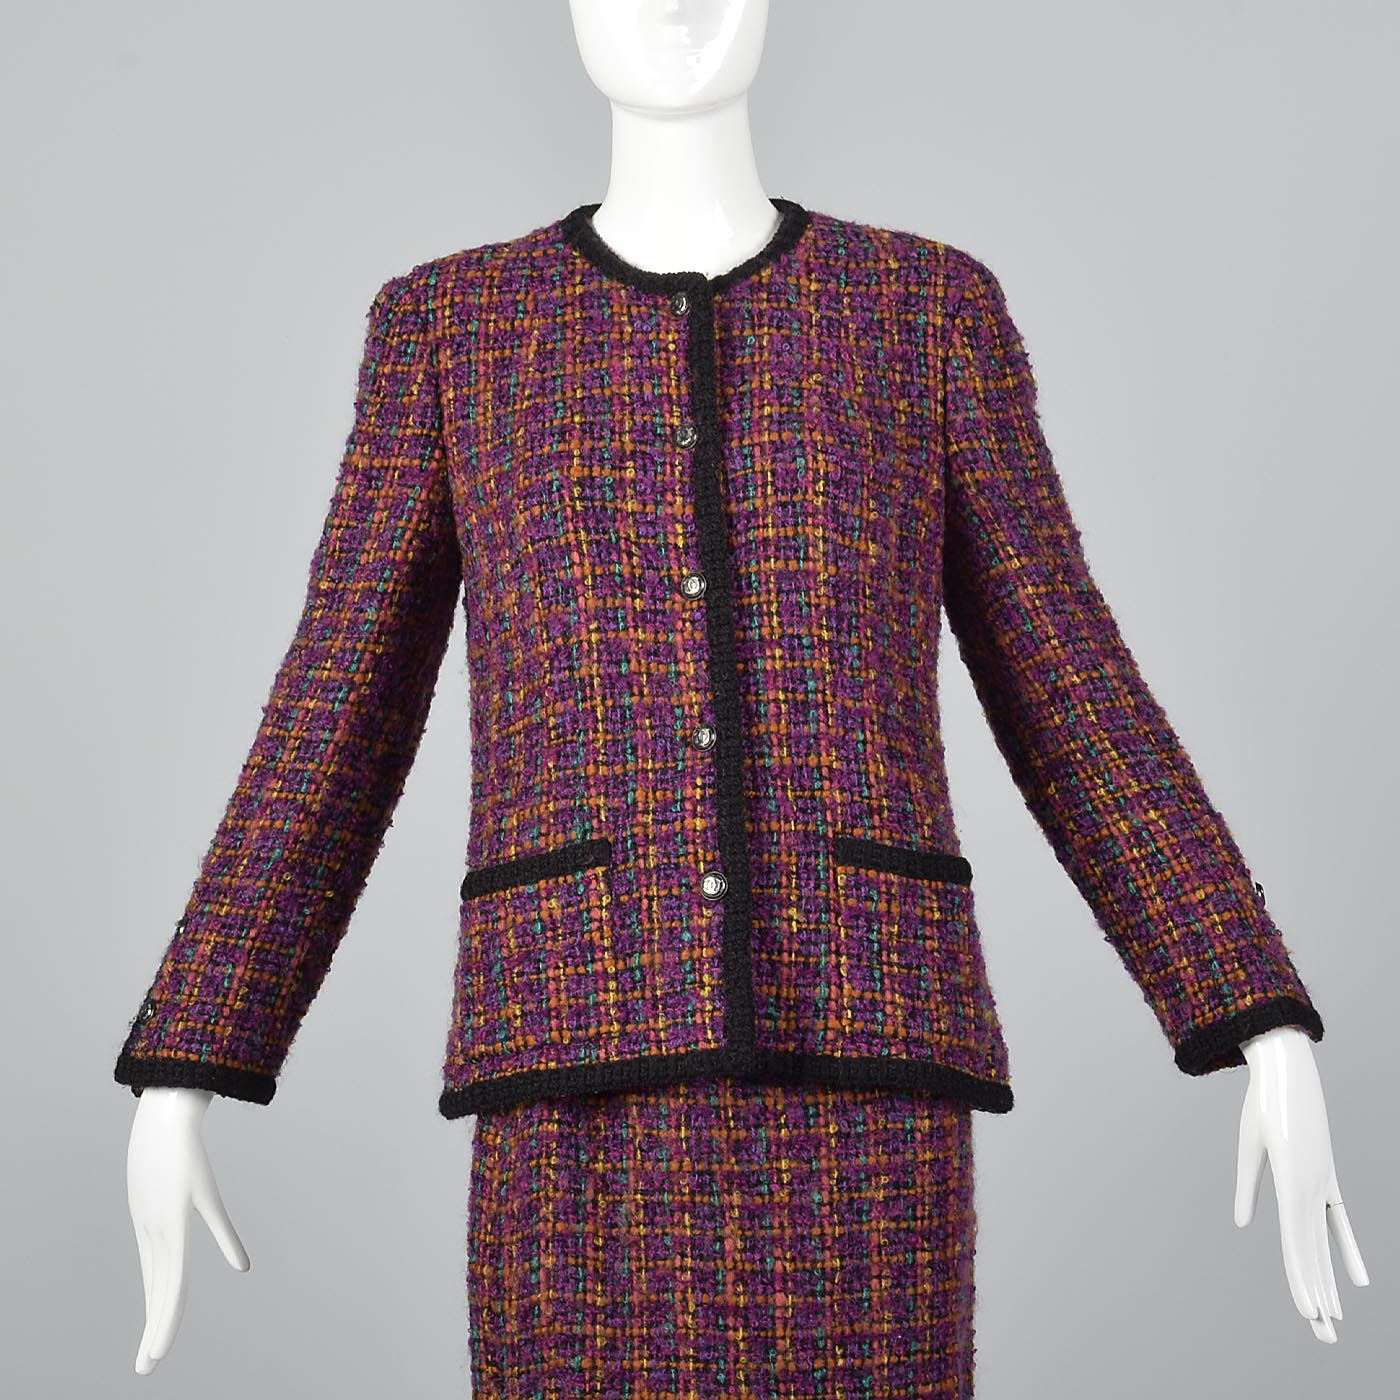 Classic Chanel Pink Tweed Skirt Suit